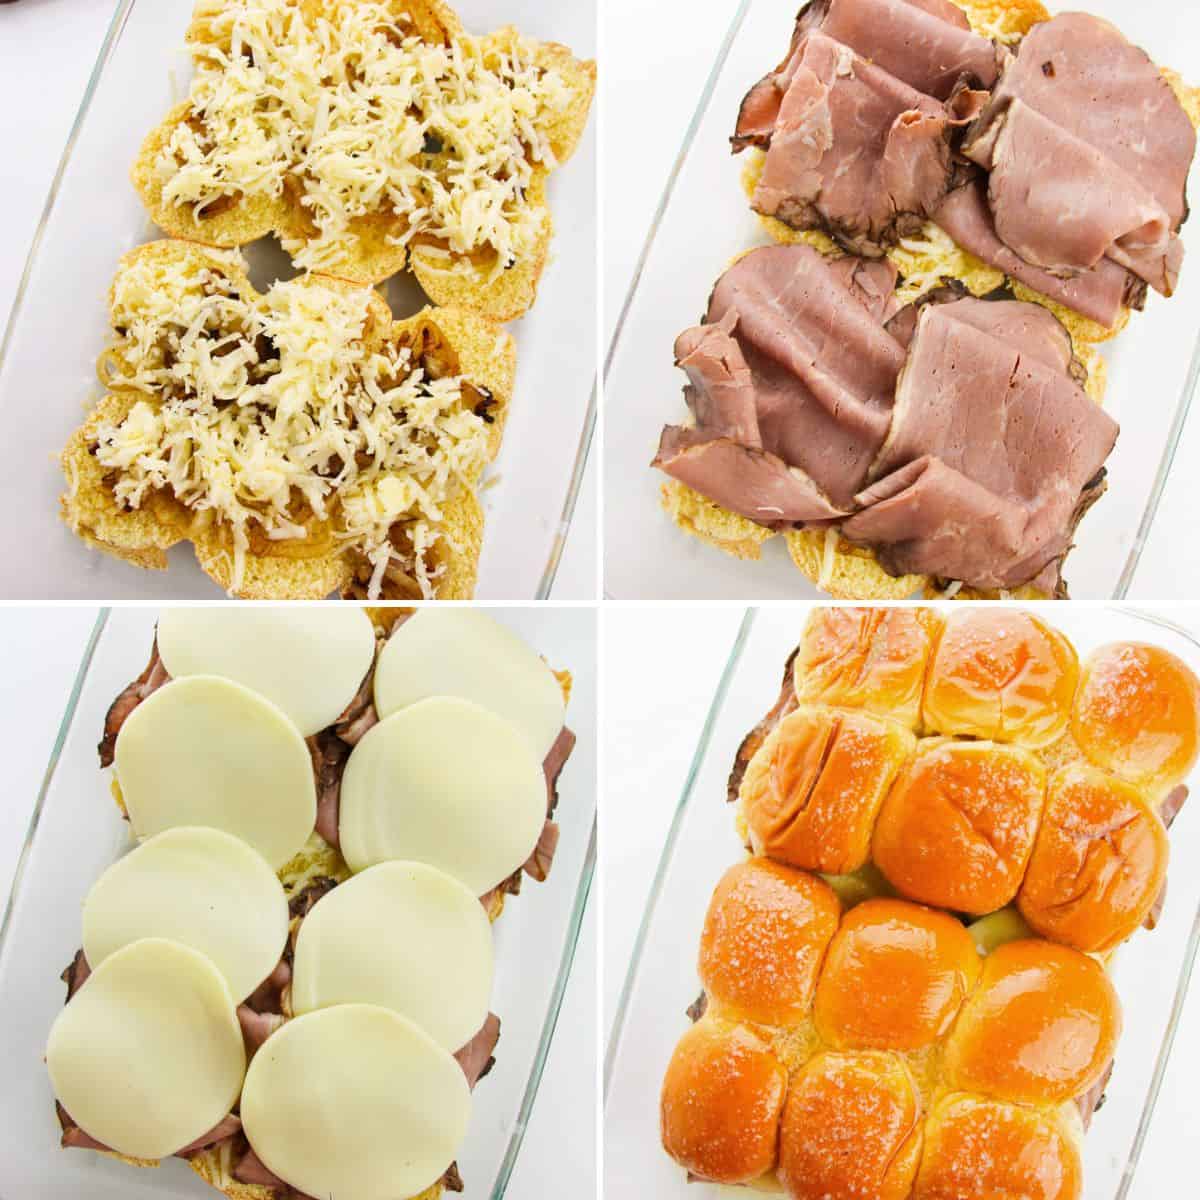 4 image collage of french dip slider assembly in a glass casserole dish. First caramelized onions and shredded swiss are added to the tops of the buns, then roast beef, next provolone cheese, and lastly the tops of the Hawaiian roll buns.